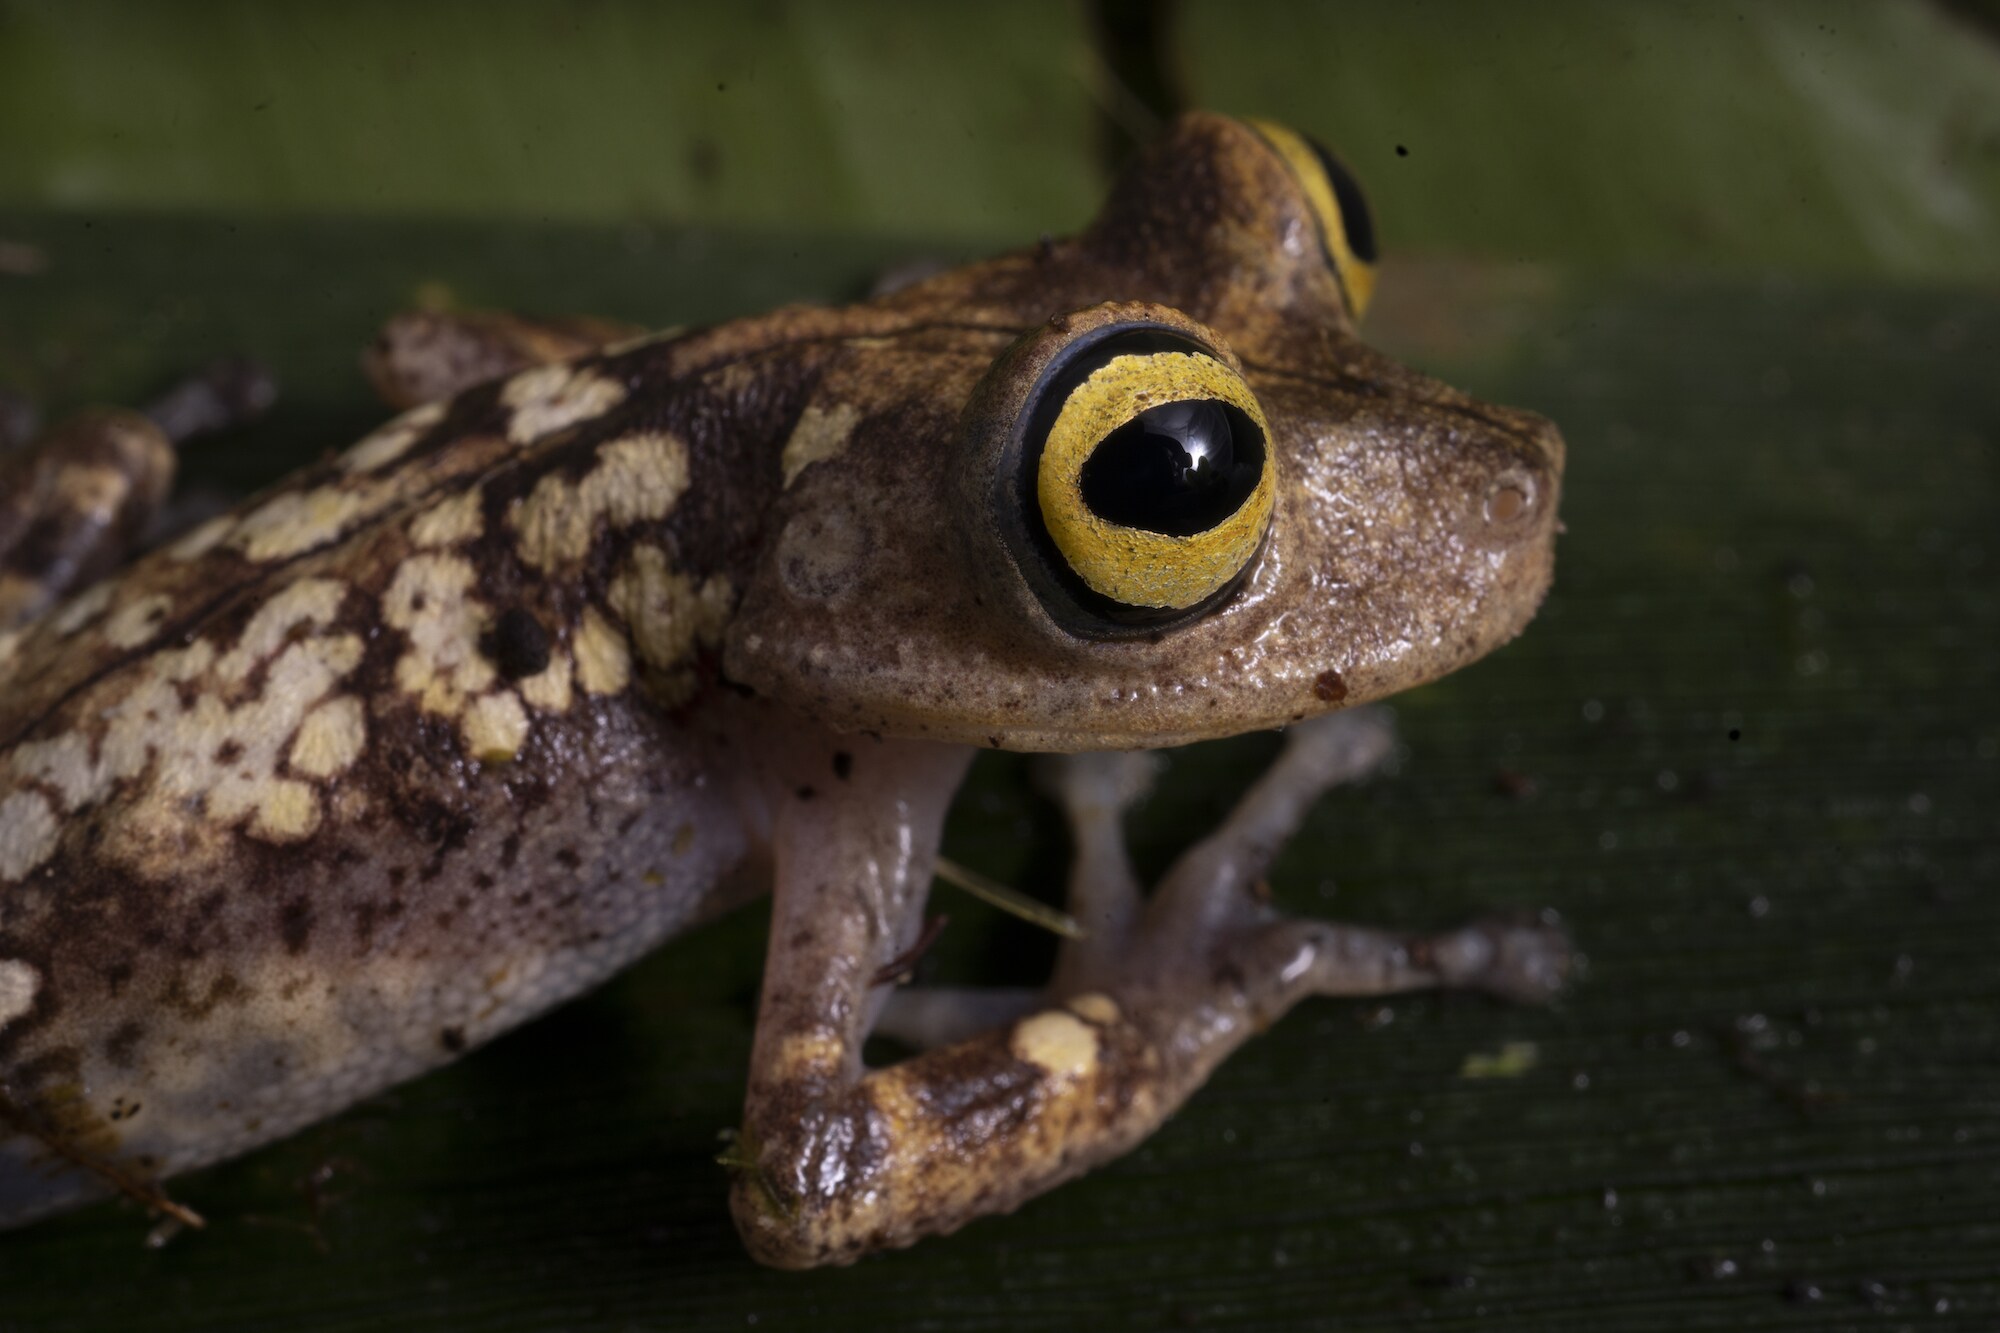 Biologist Bruce Means is looking for new species of frogs that inhabit the region of tepuis deep in the Amazon of Western Guyana. (National Geographic/RYAN VALASEK)